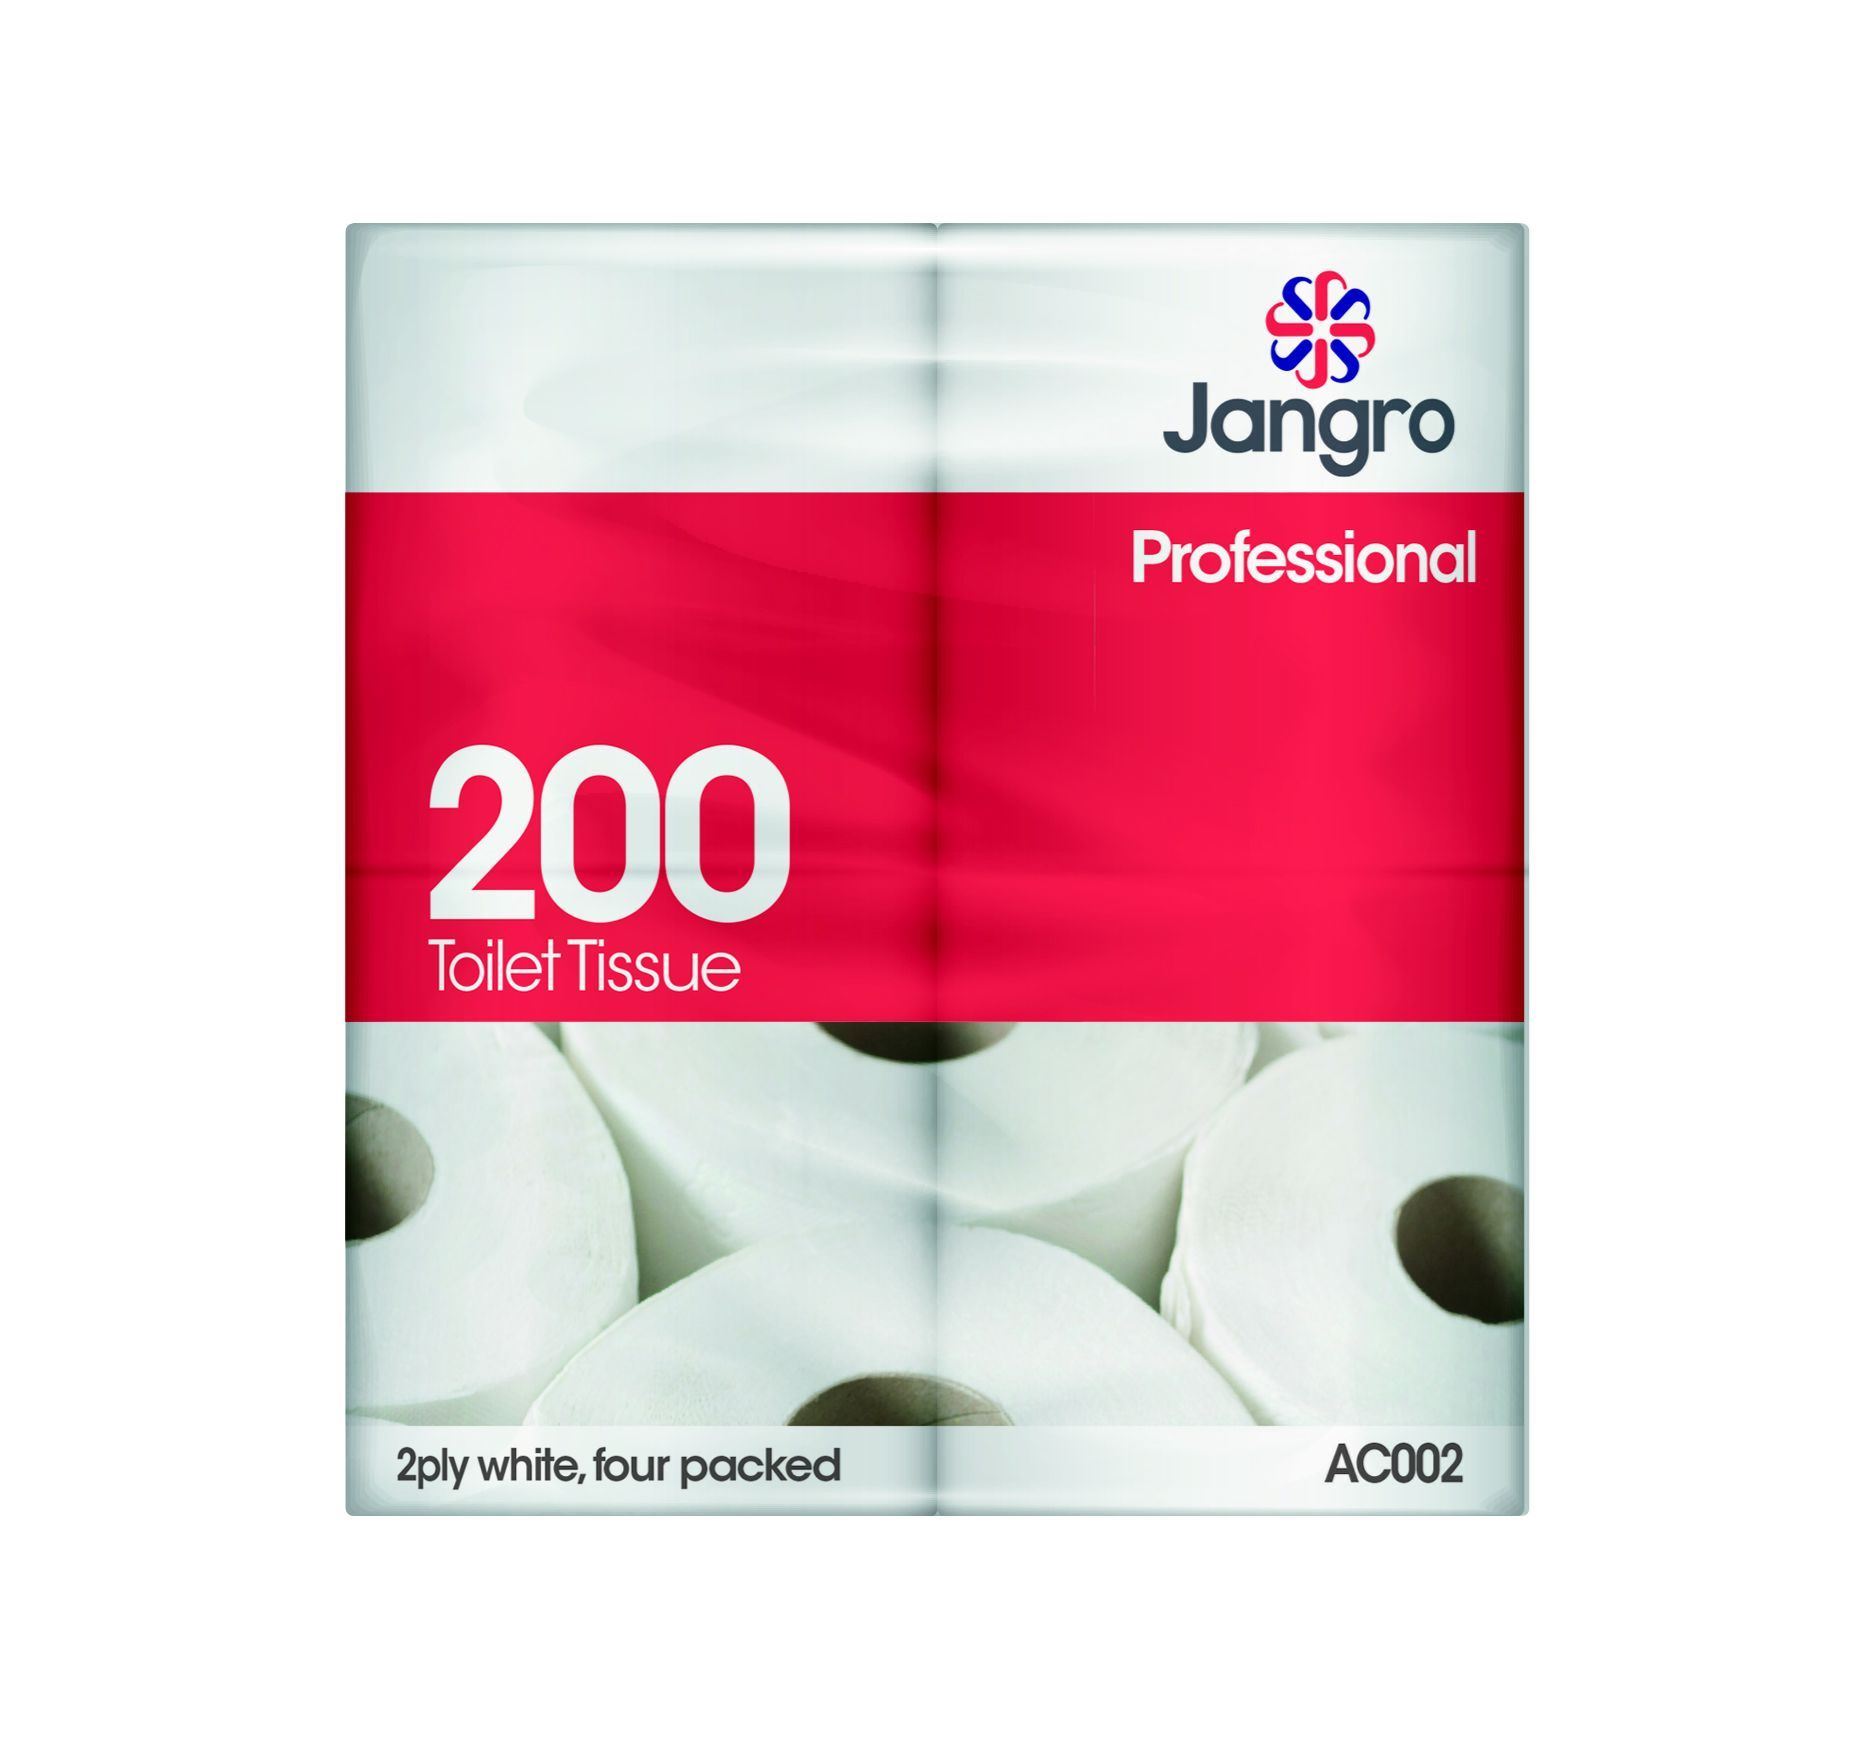 Jangro 2 Ply Toilet Paper - 200 Sheets (Case of 36) - 504002 / AC002